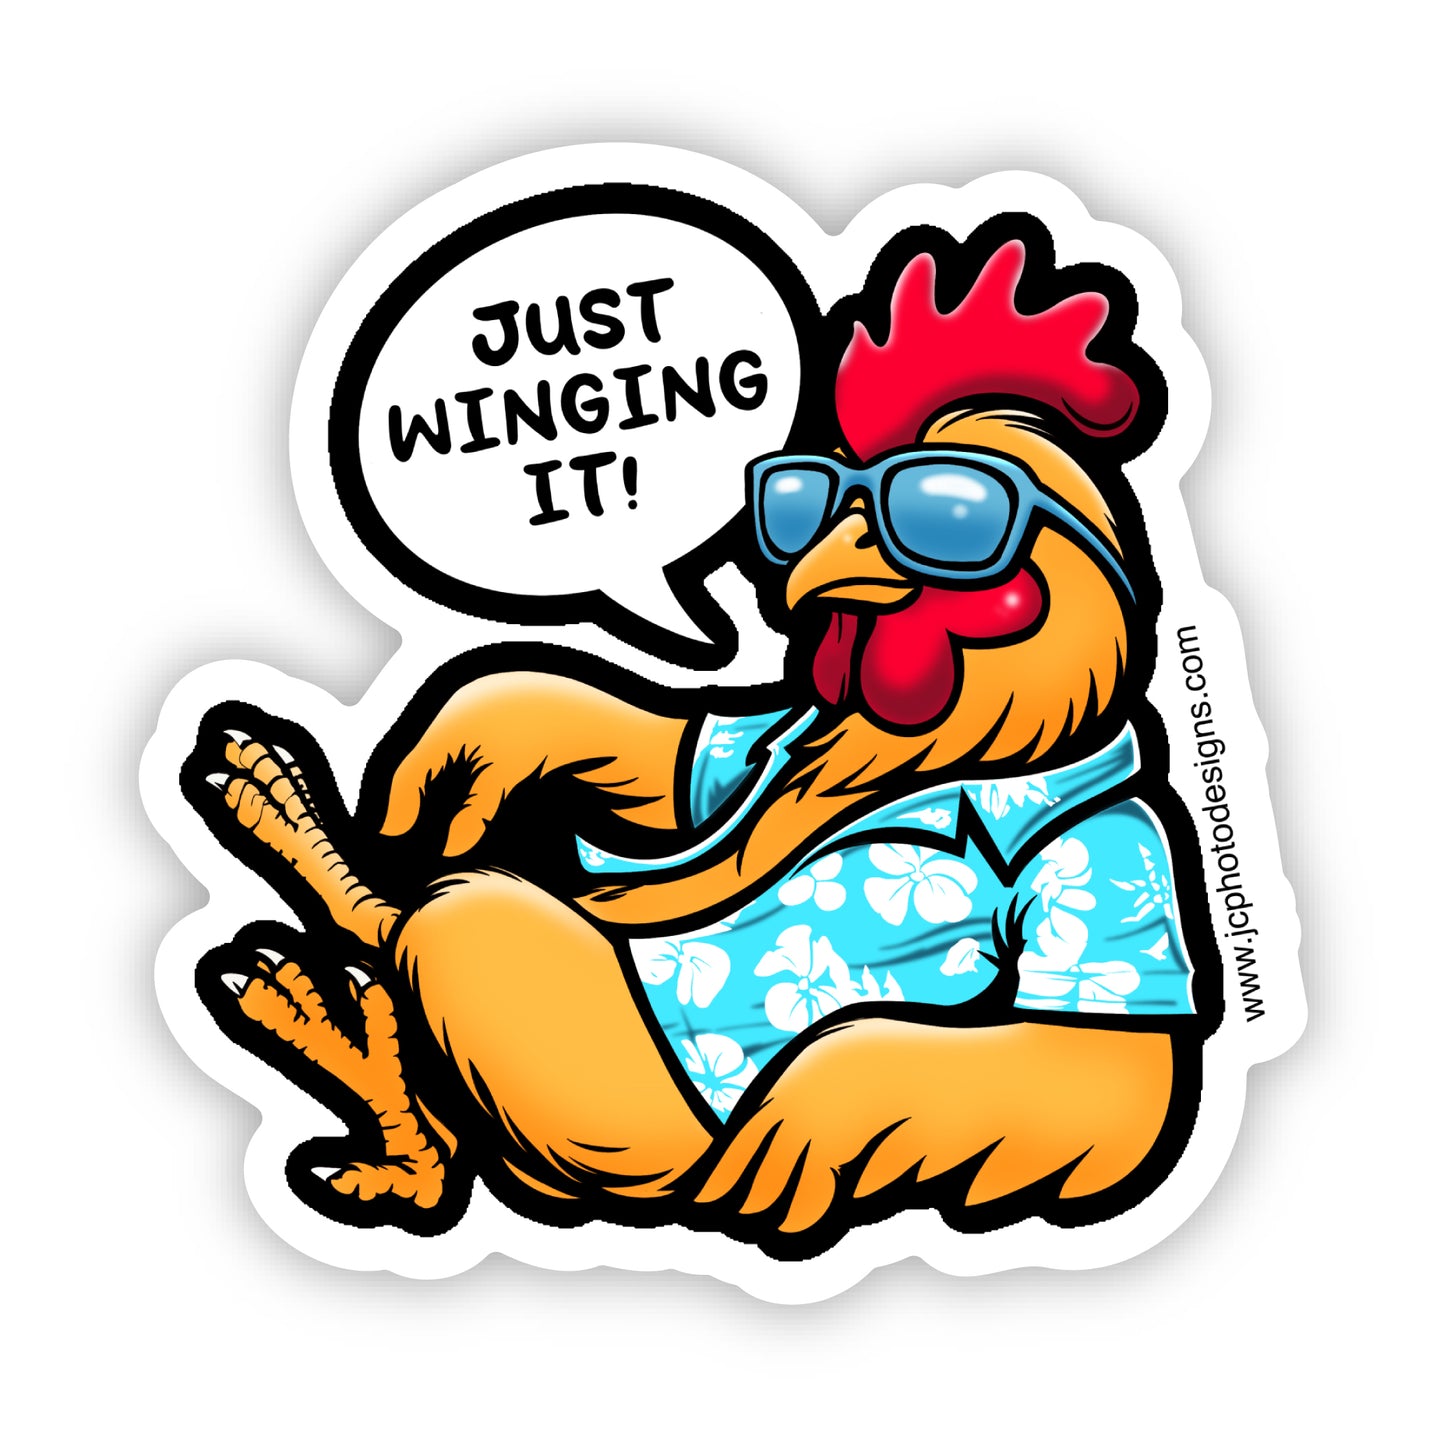 Cool Chicken ‘Just Winging It!’ Sticker - Relaxed Hawaiian Vibe Sticker